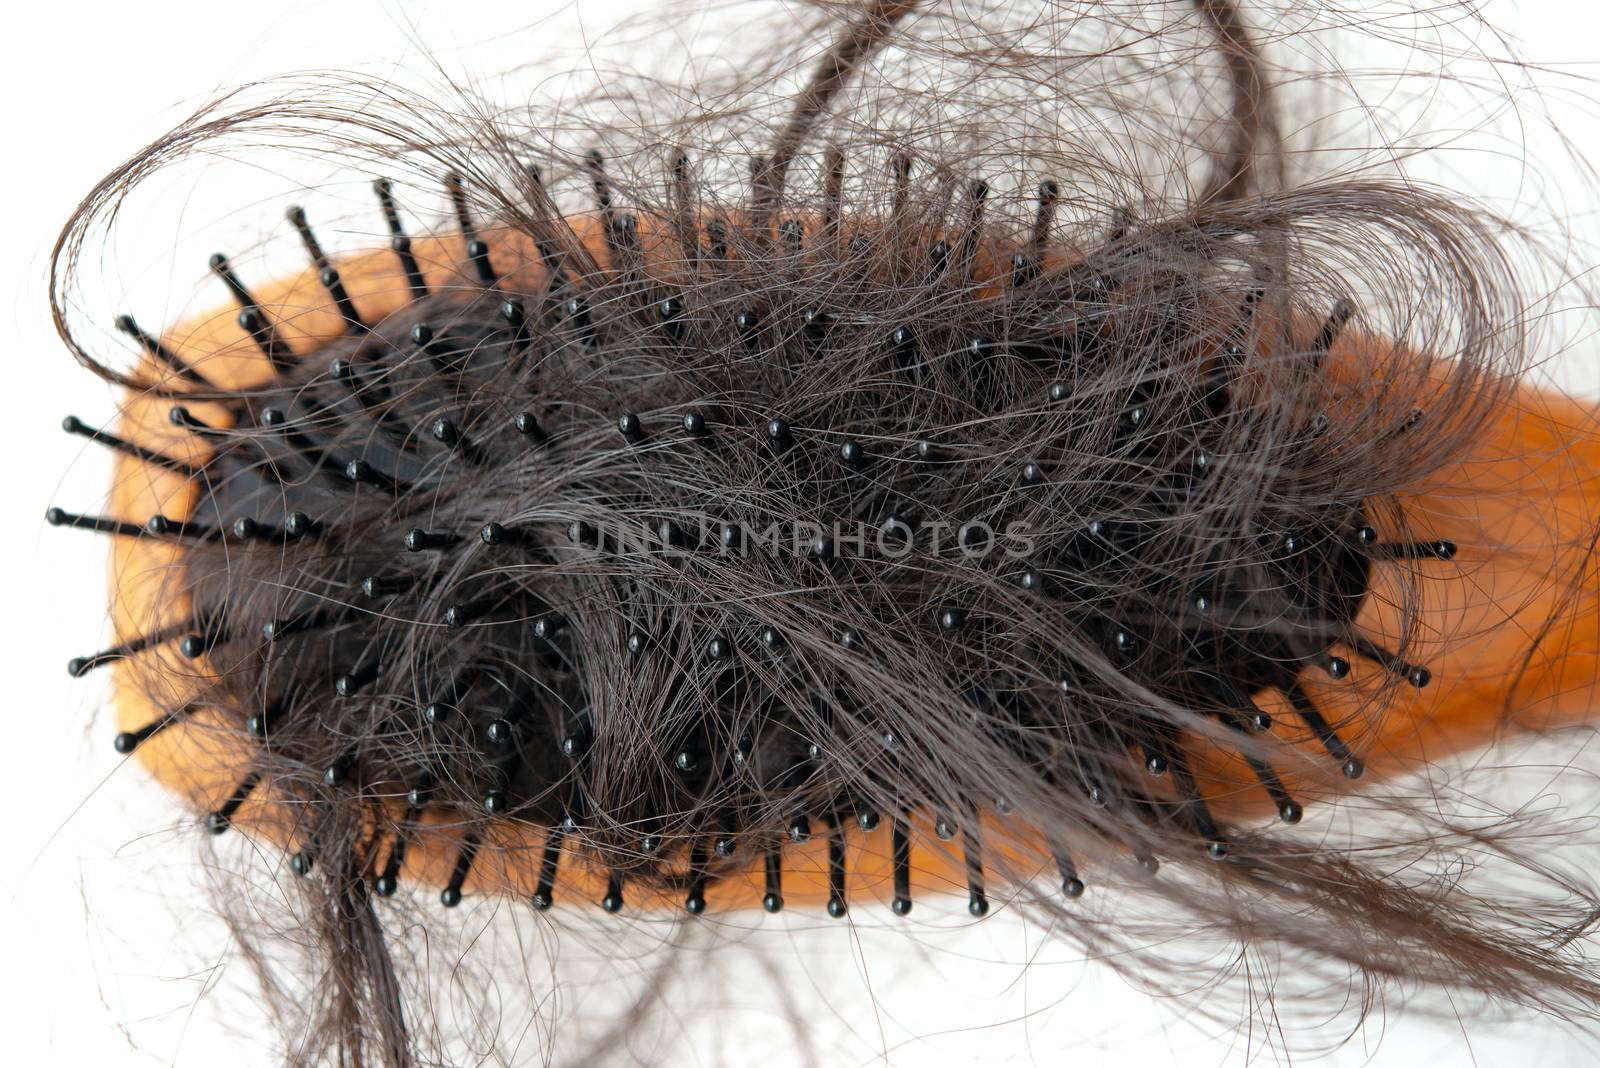 Hairloss problem. Hairbrush with lost hair on it, isolated on white background.